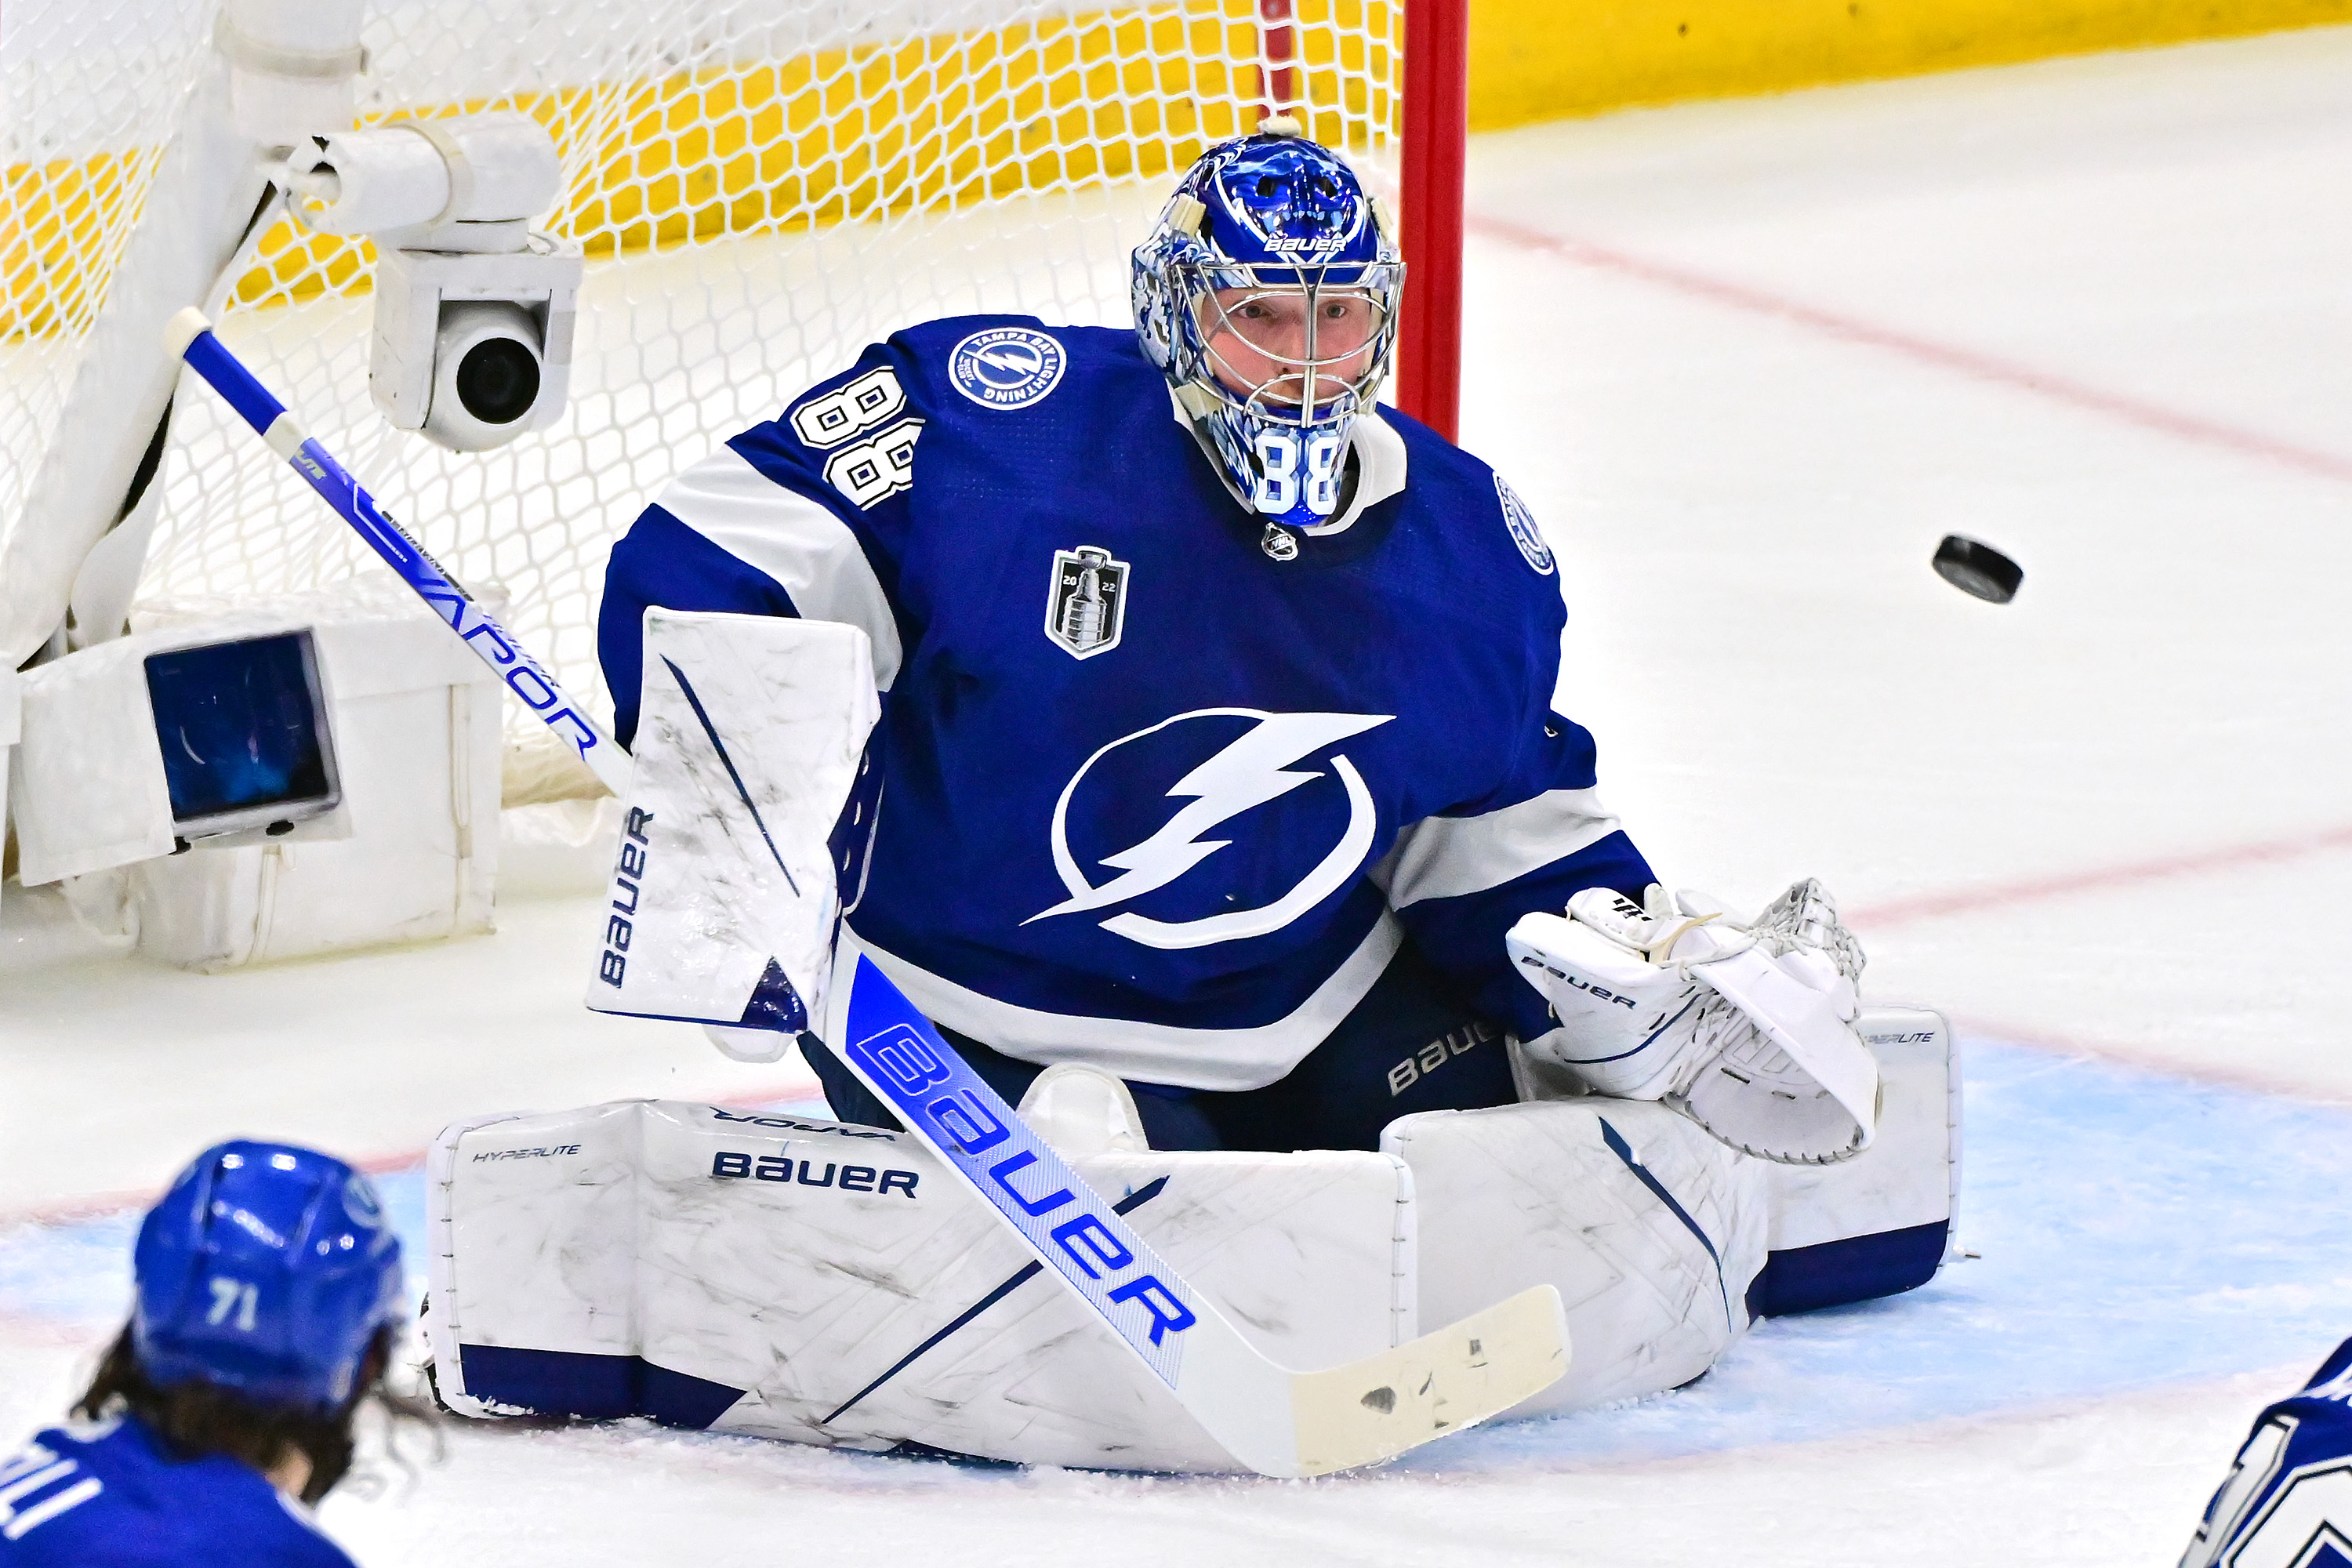 Lightning Need Ross Colton to Step Up During Brayden Point's Absence